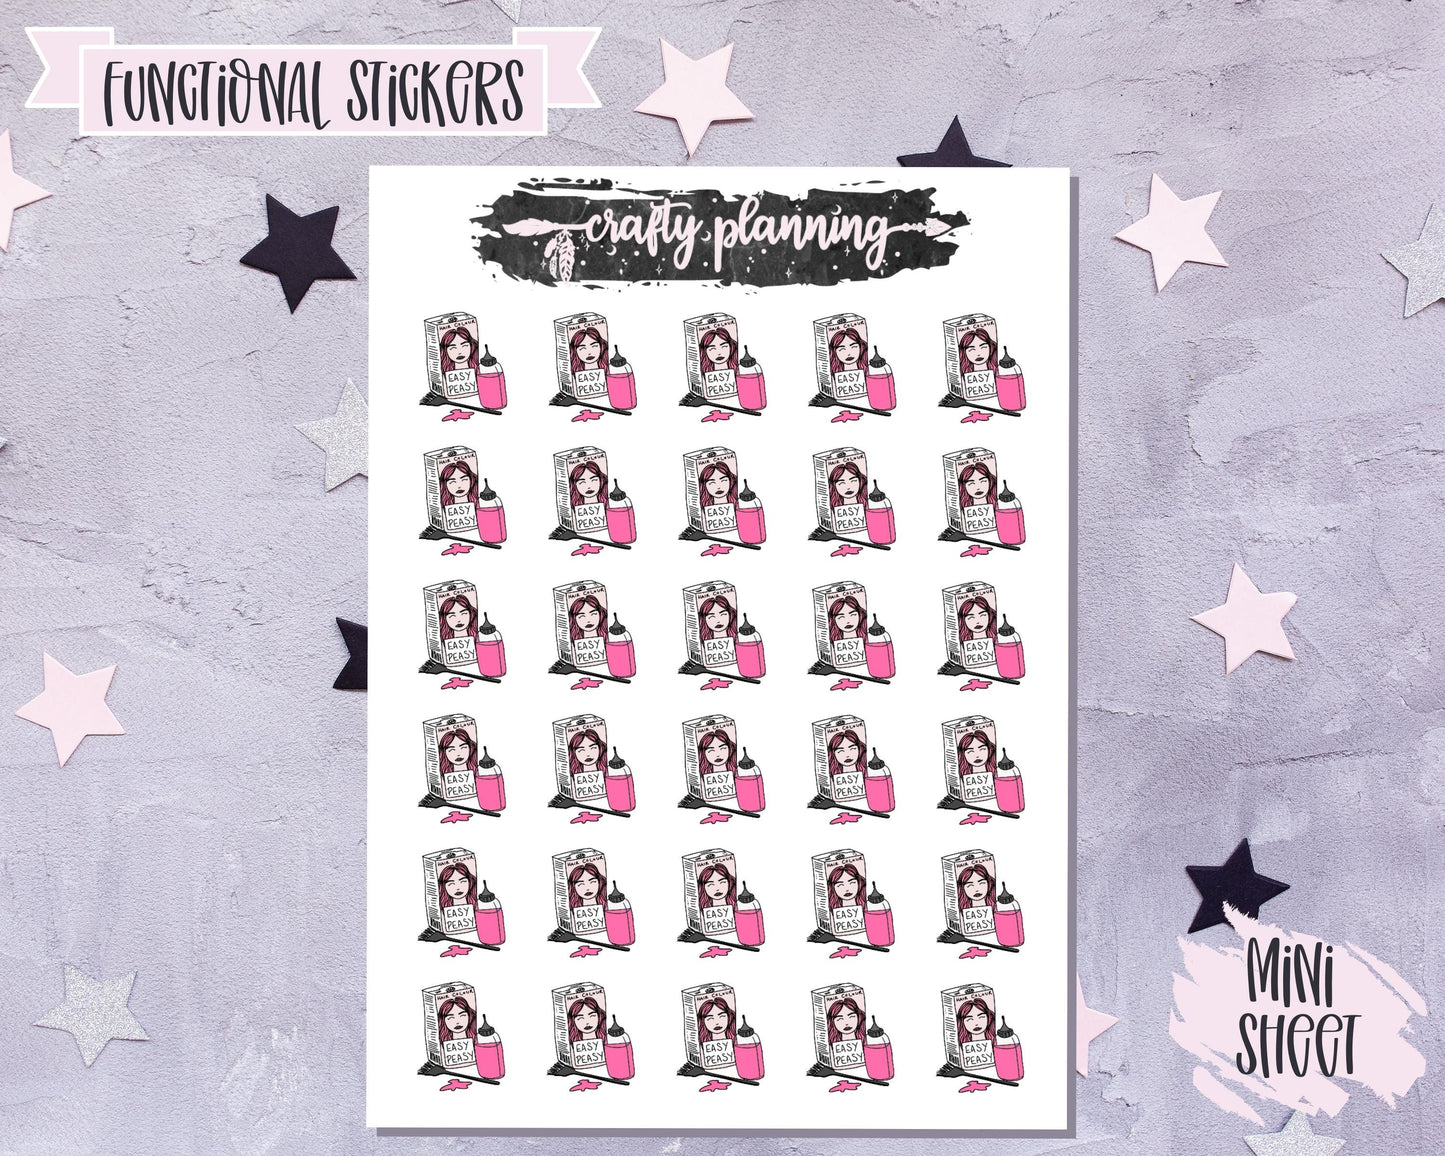 Hair Stickers, Hair Dye, Planner Stickers, Self Care Stickers, Beauty Stickers, Hairdresser Stickers, Functional Stickers